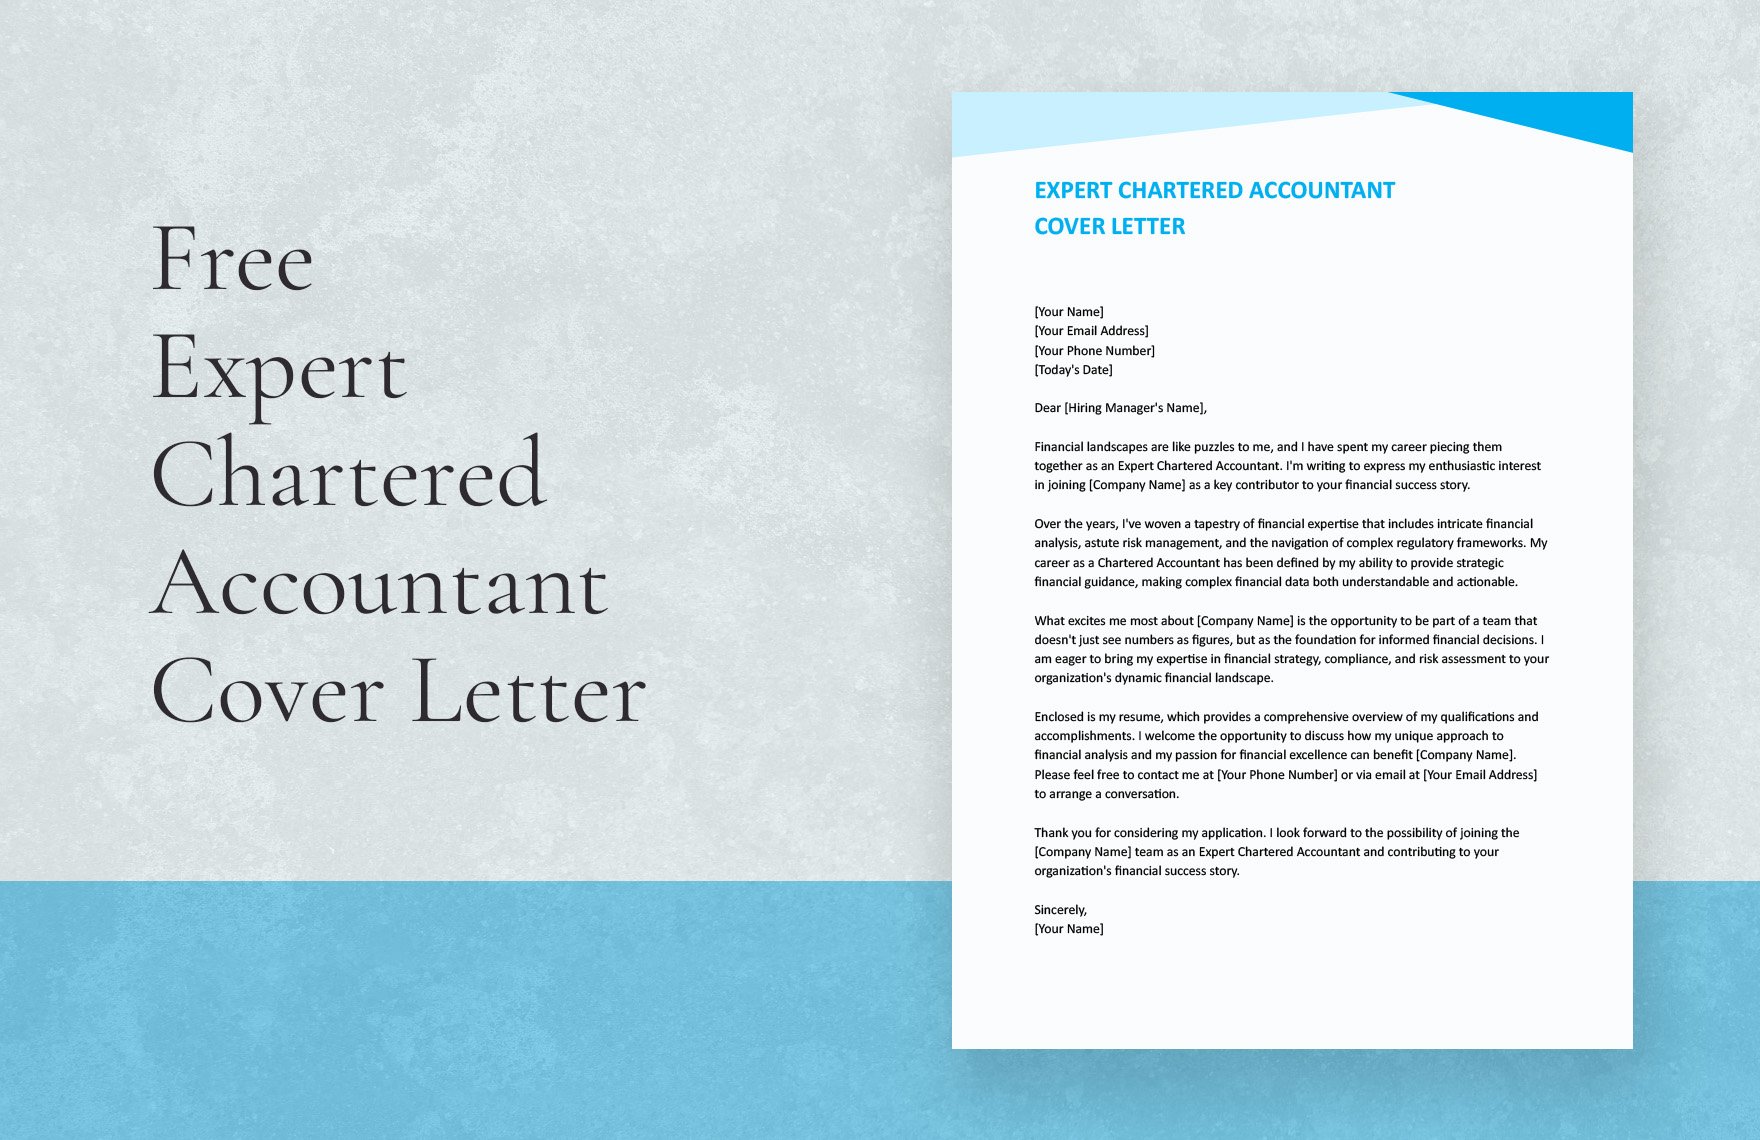 Expert Chartered Accountant Cover Letter in Word, Google Docs